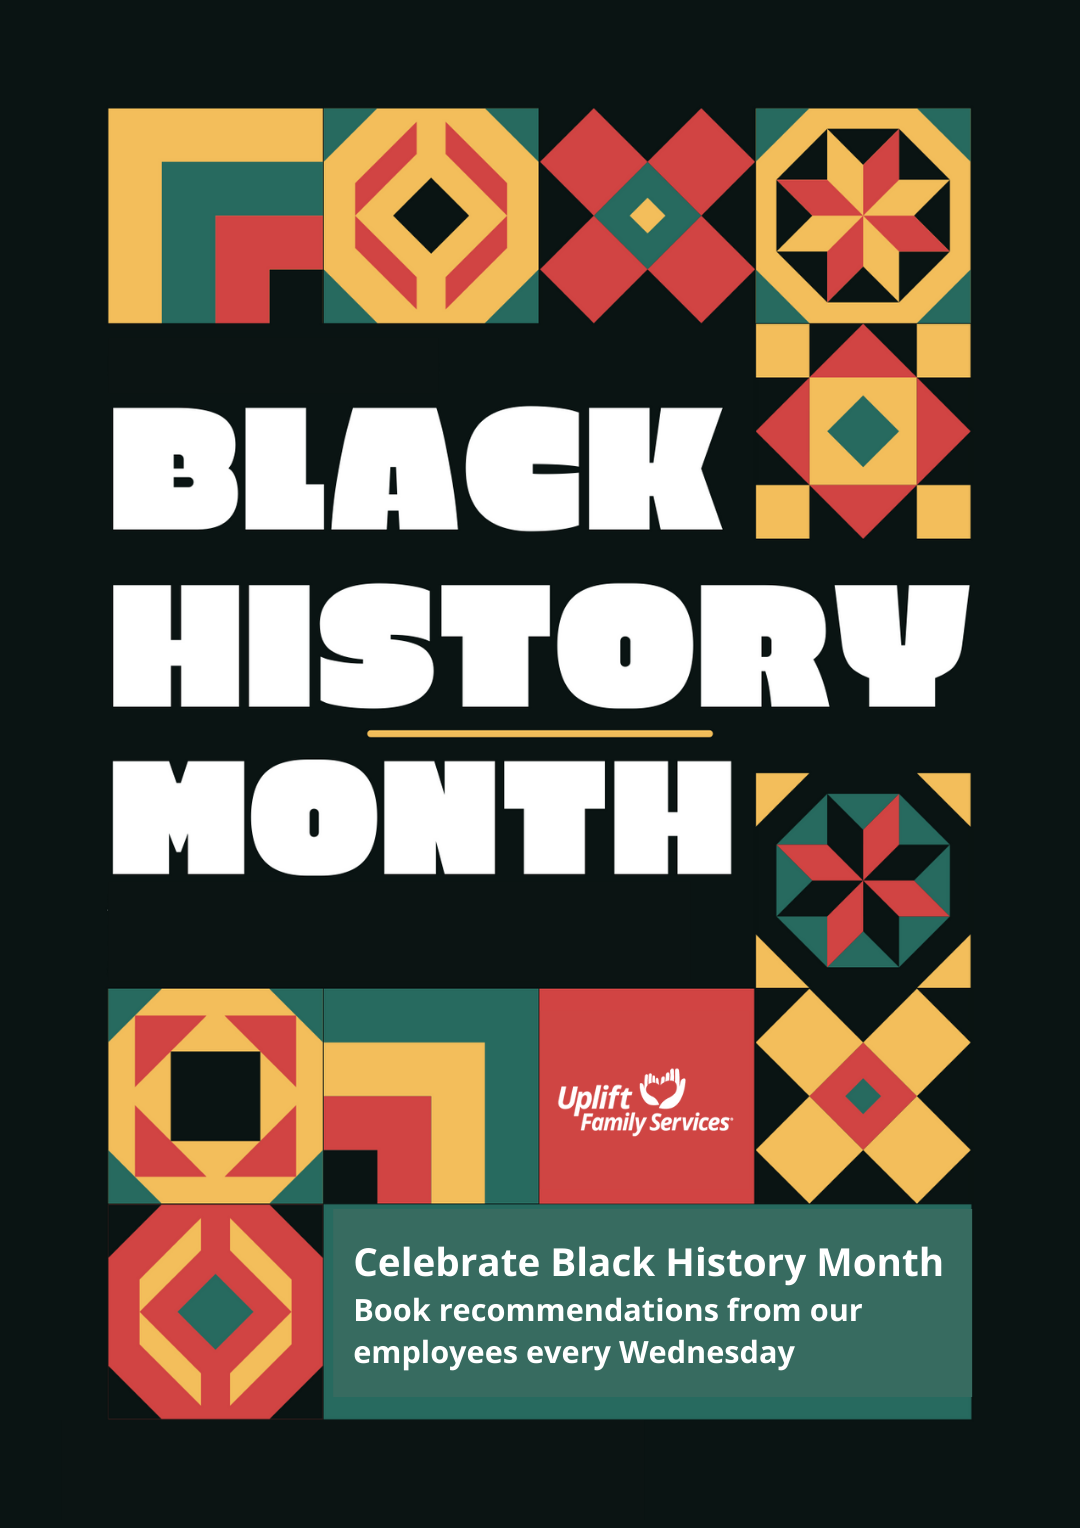 black history month text and graphic art